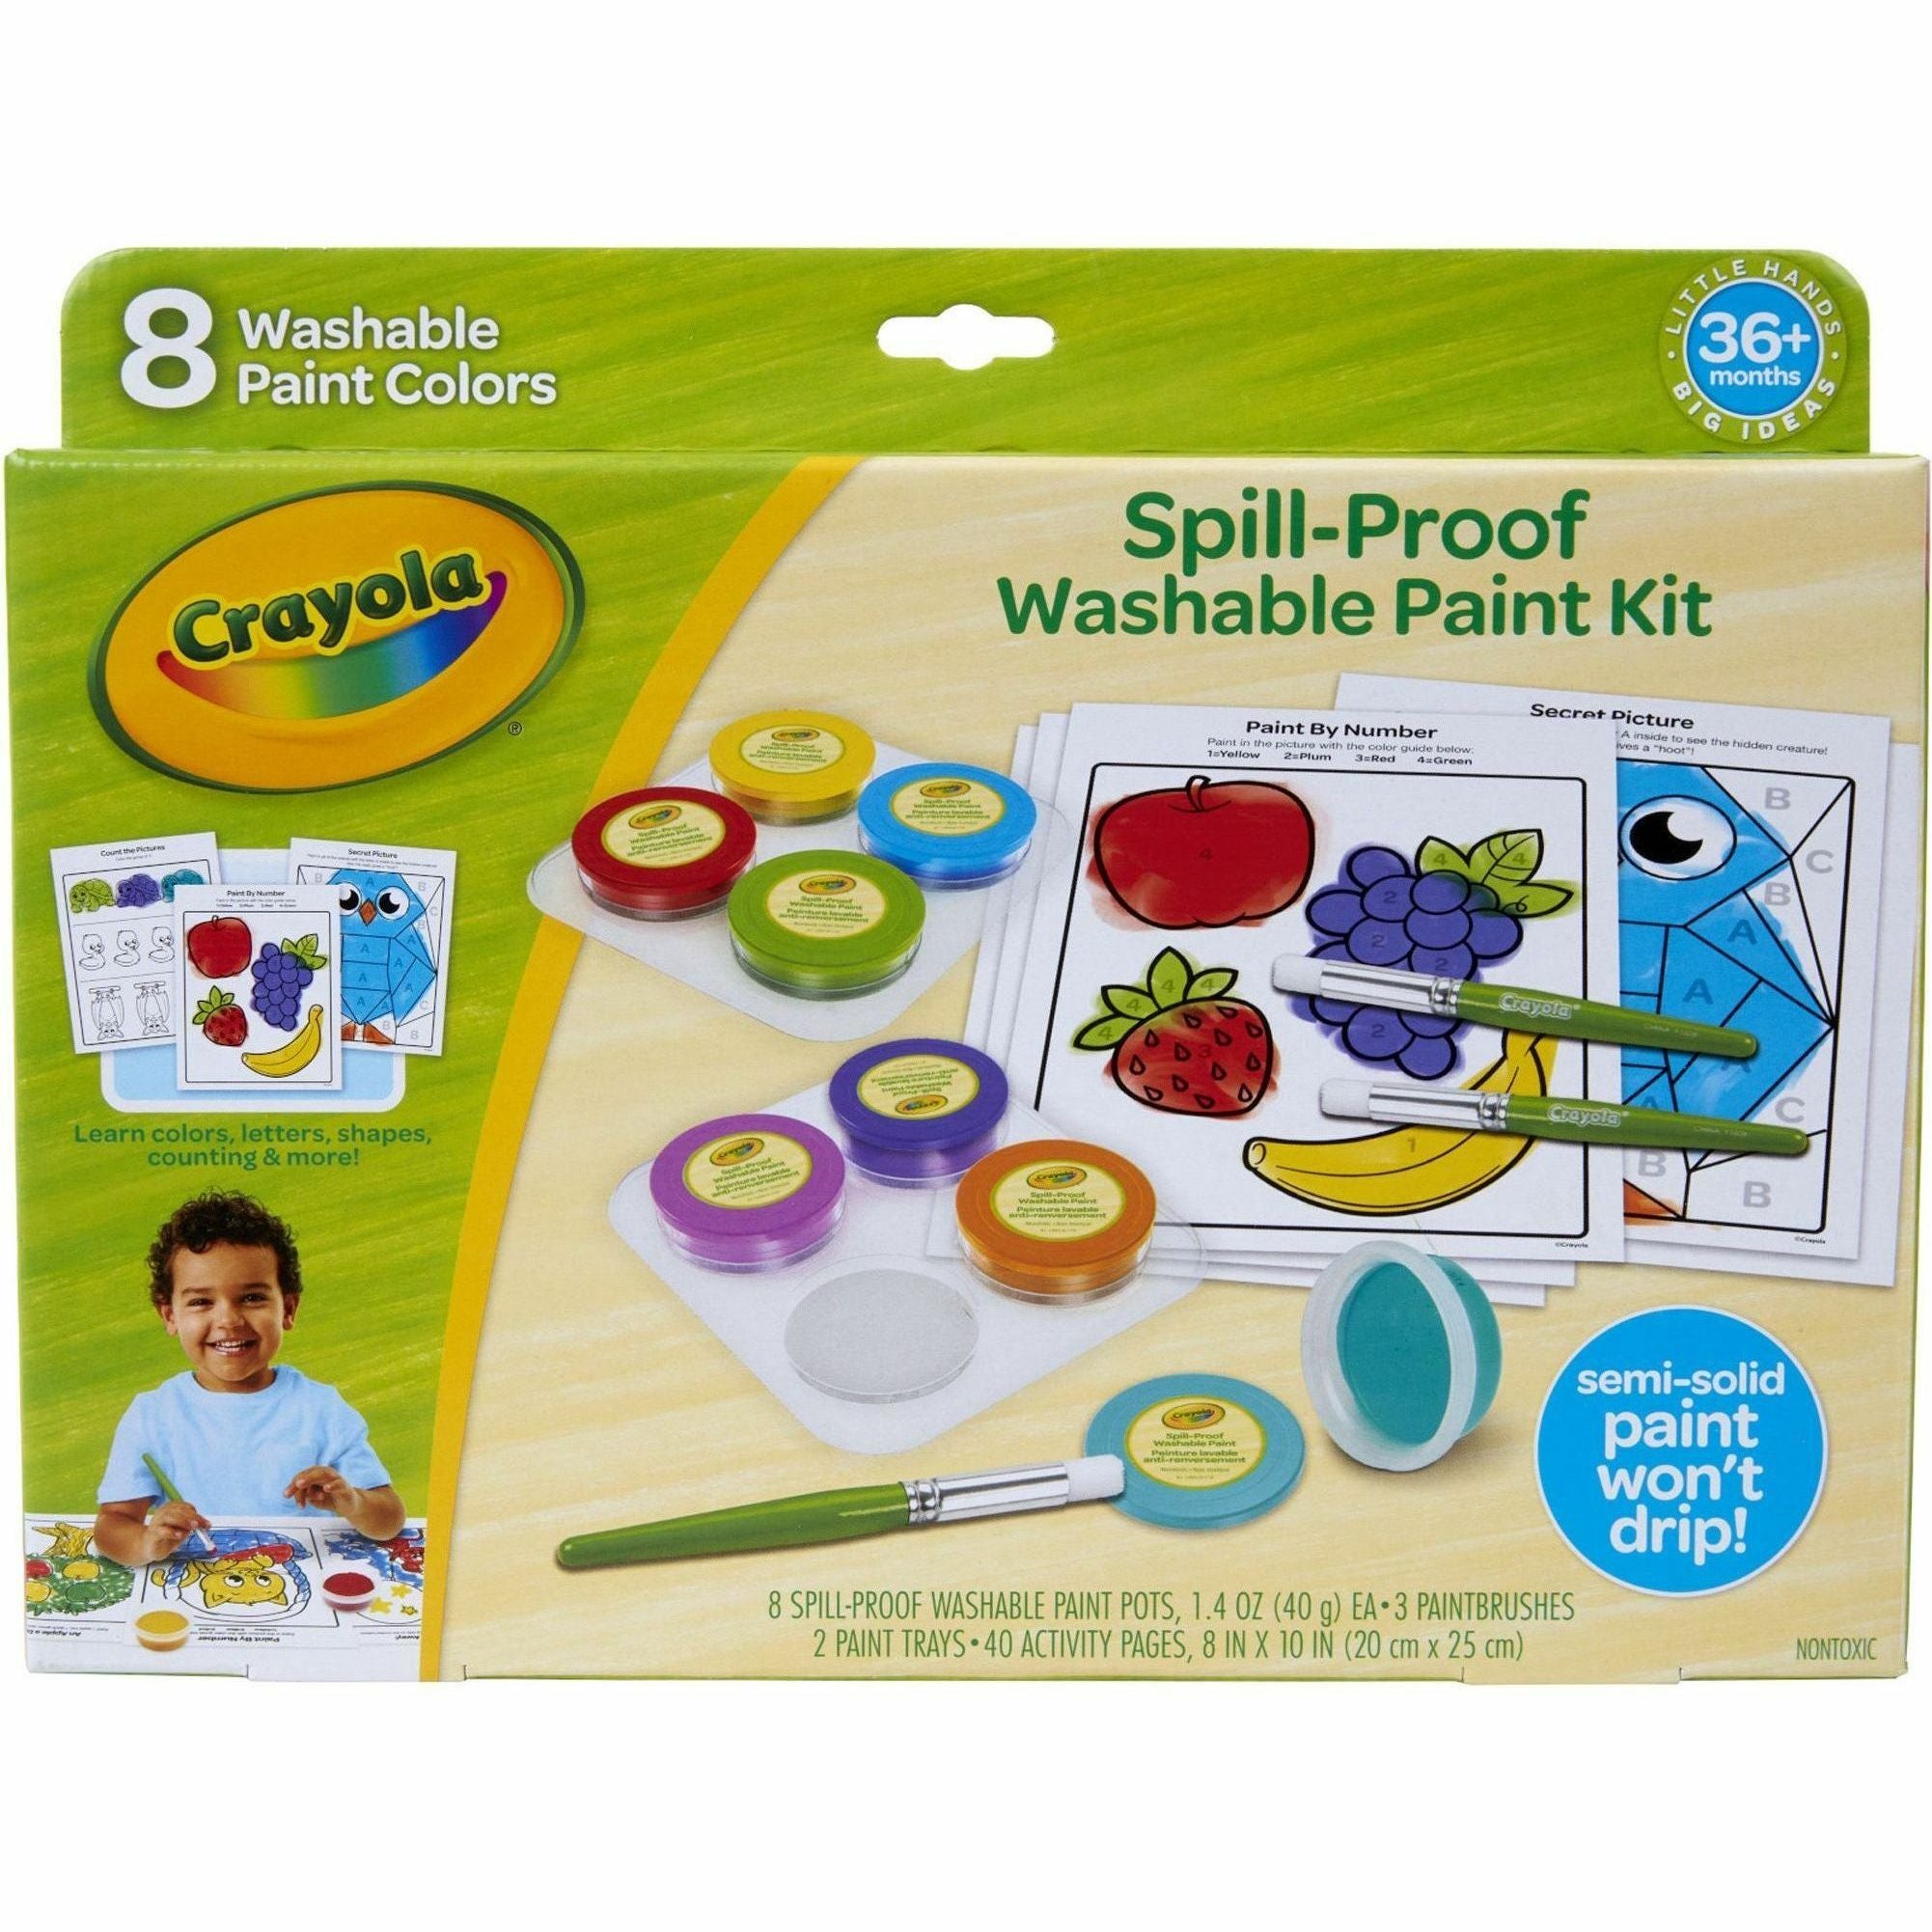 crayola-spill-proof-washable-paint-set-art-craft-fun-and-learning-recommended-for-3-year-1-kit_cyo811518 - 3